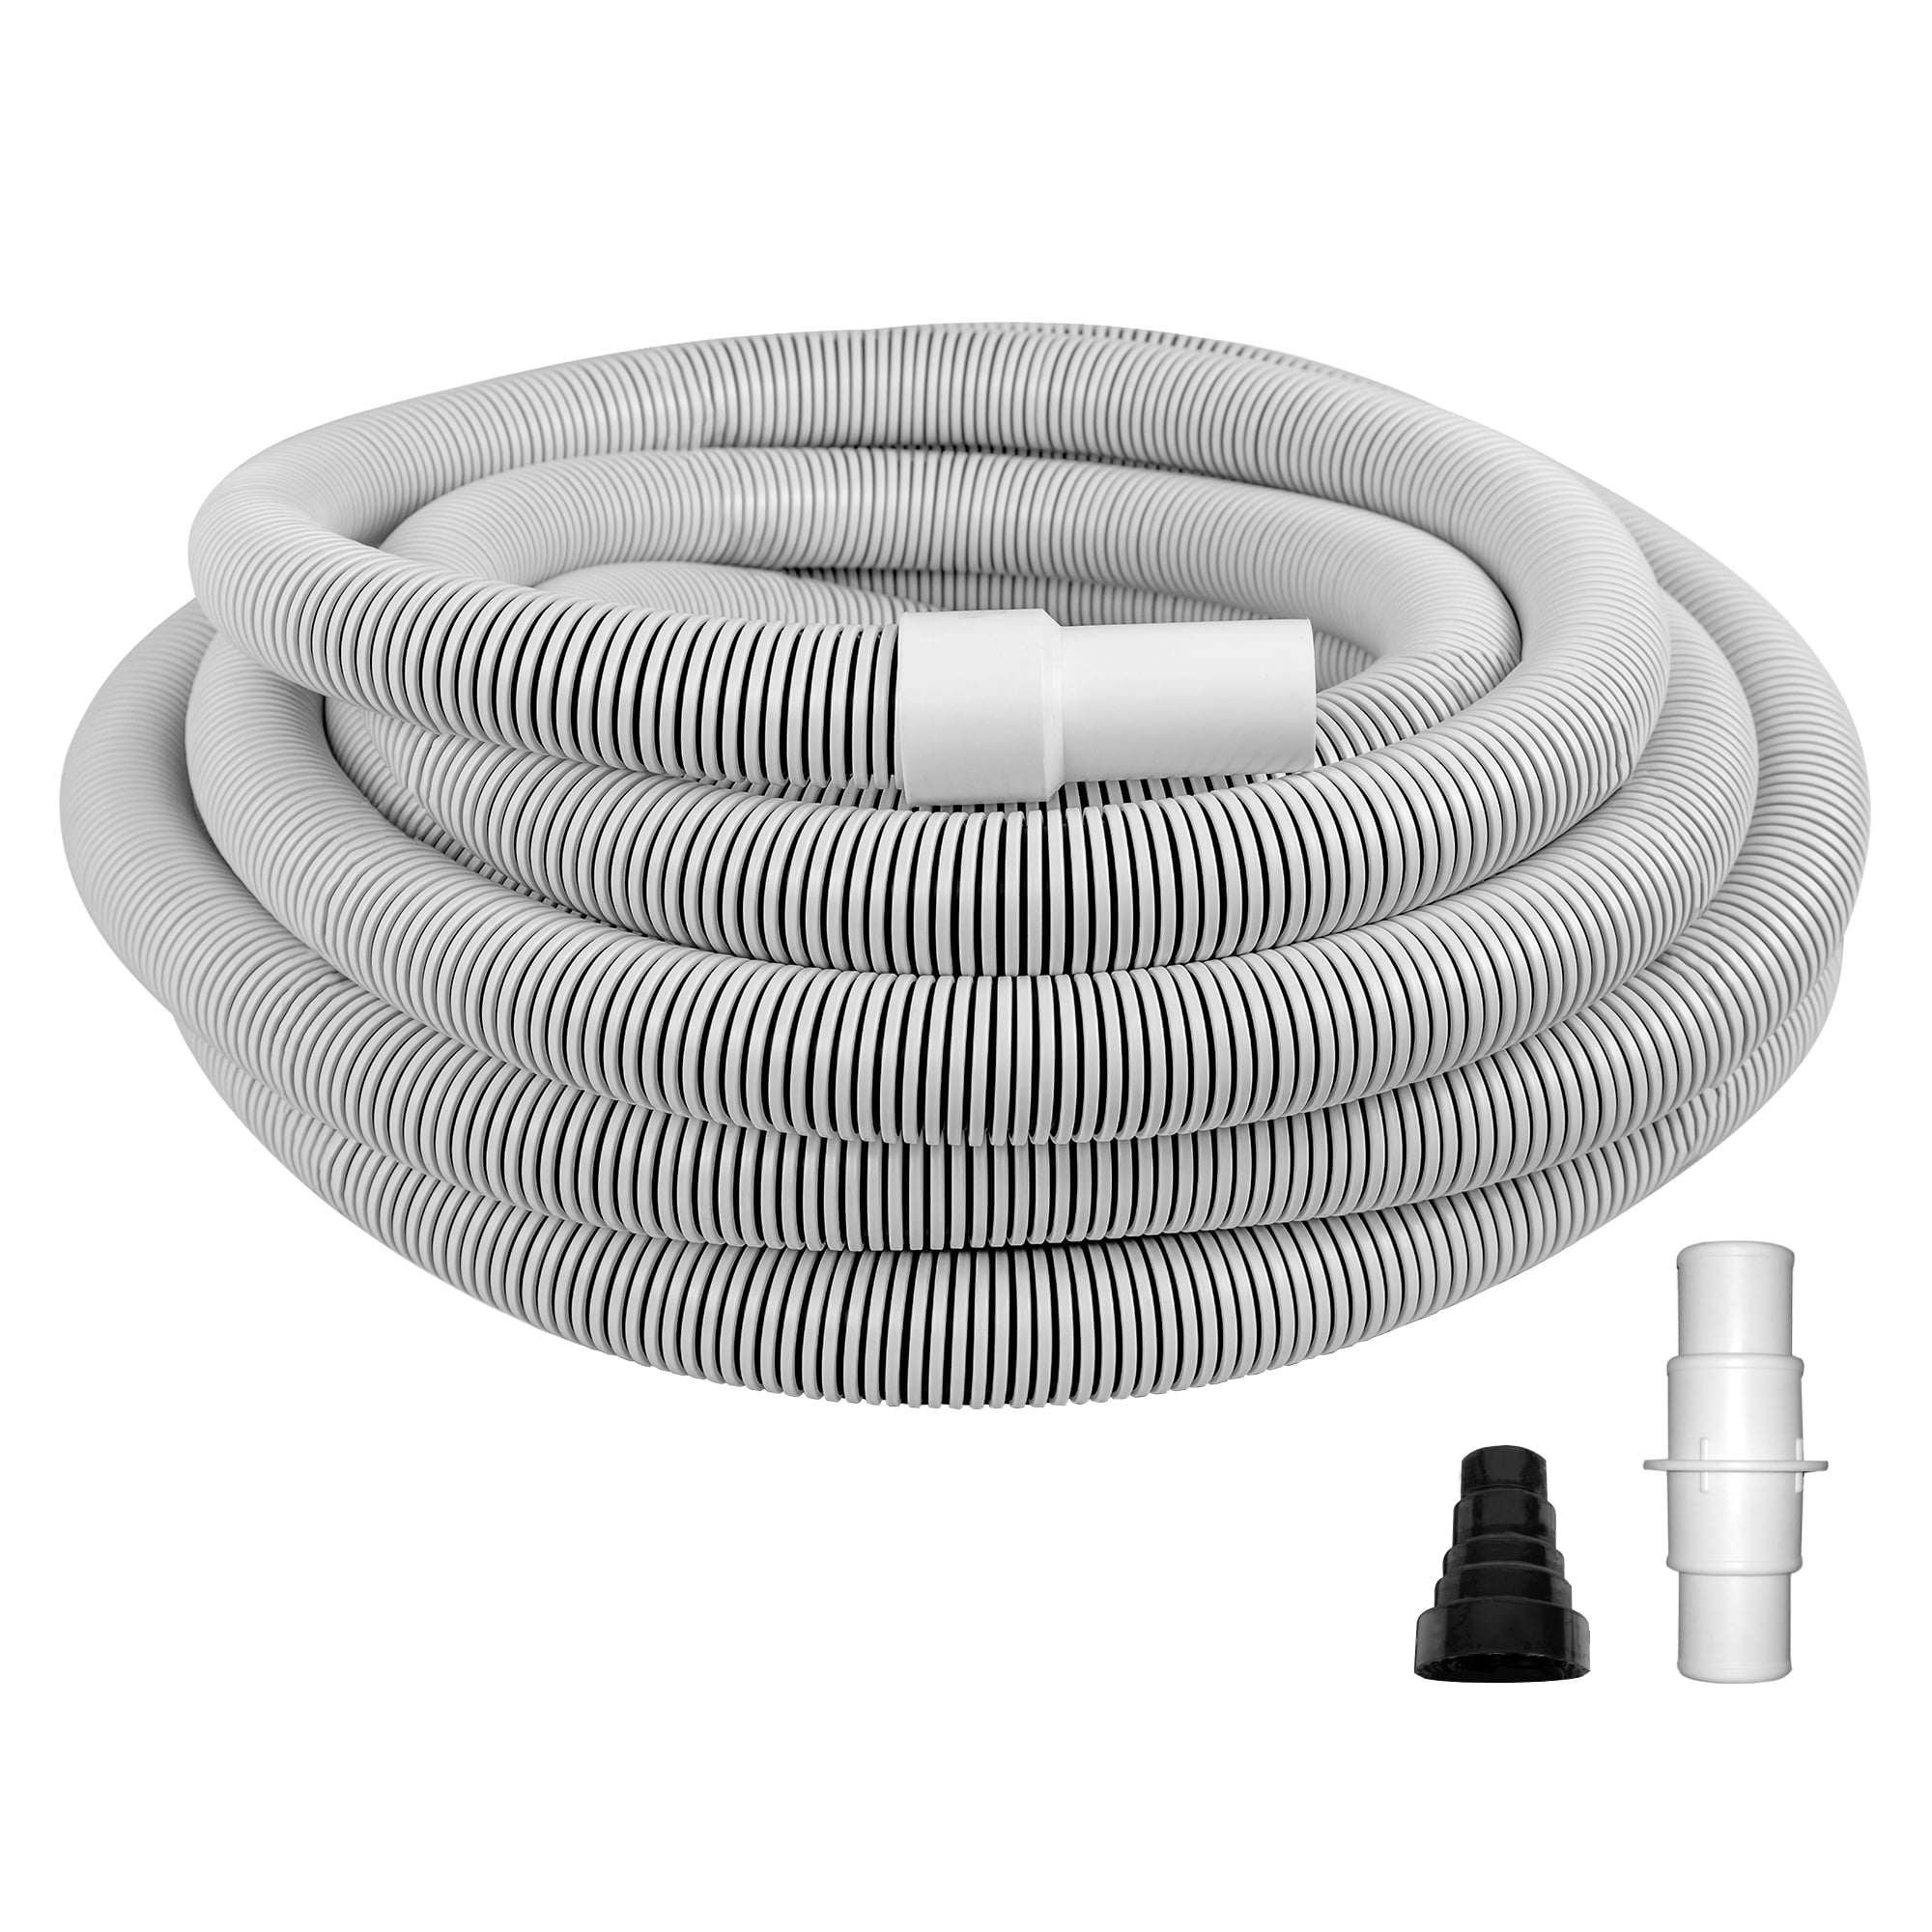 Vacuum cleaner adapter for connecting to the vacuum cleaner hose. pack of 3 vacuum cleaner hose hose adapter 